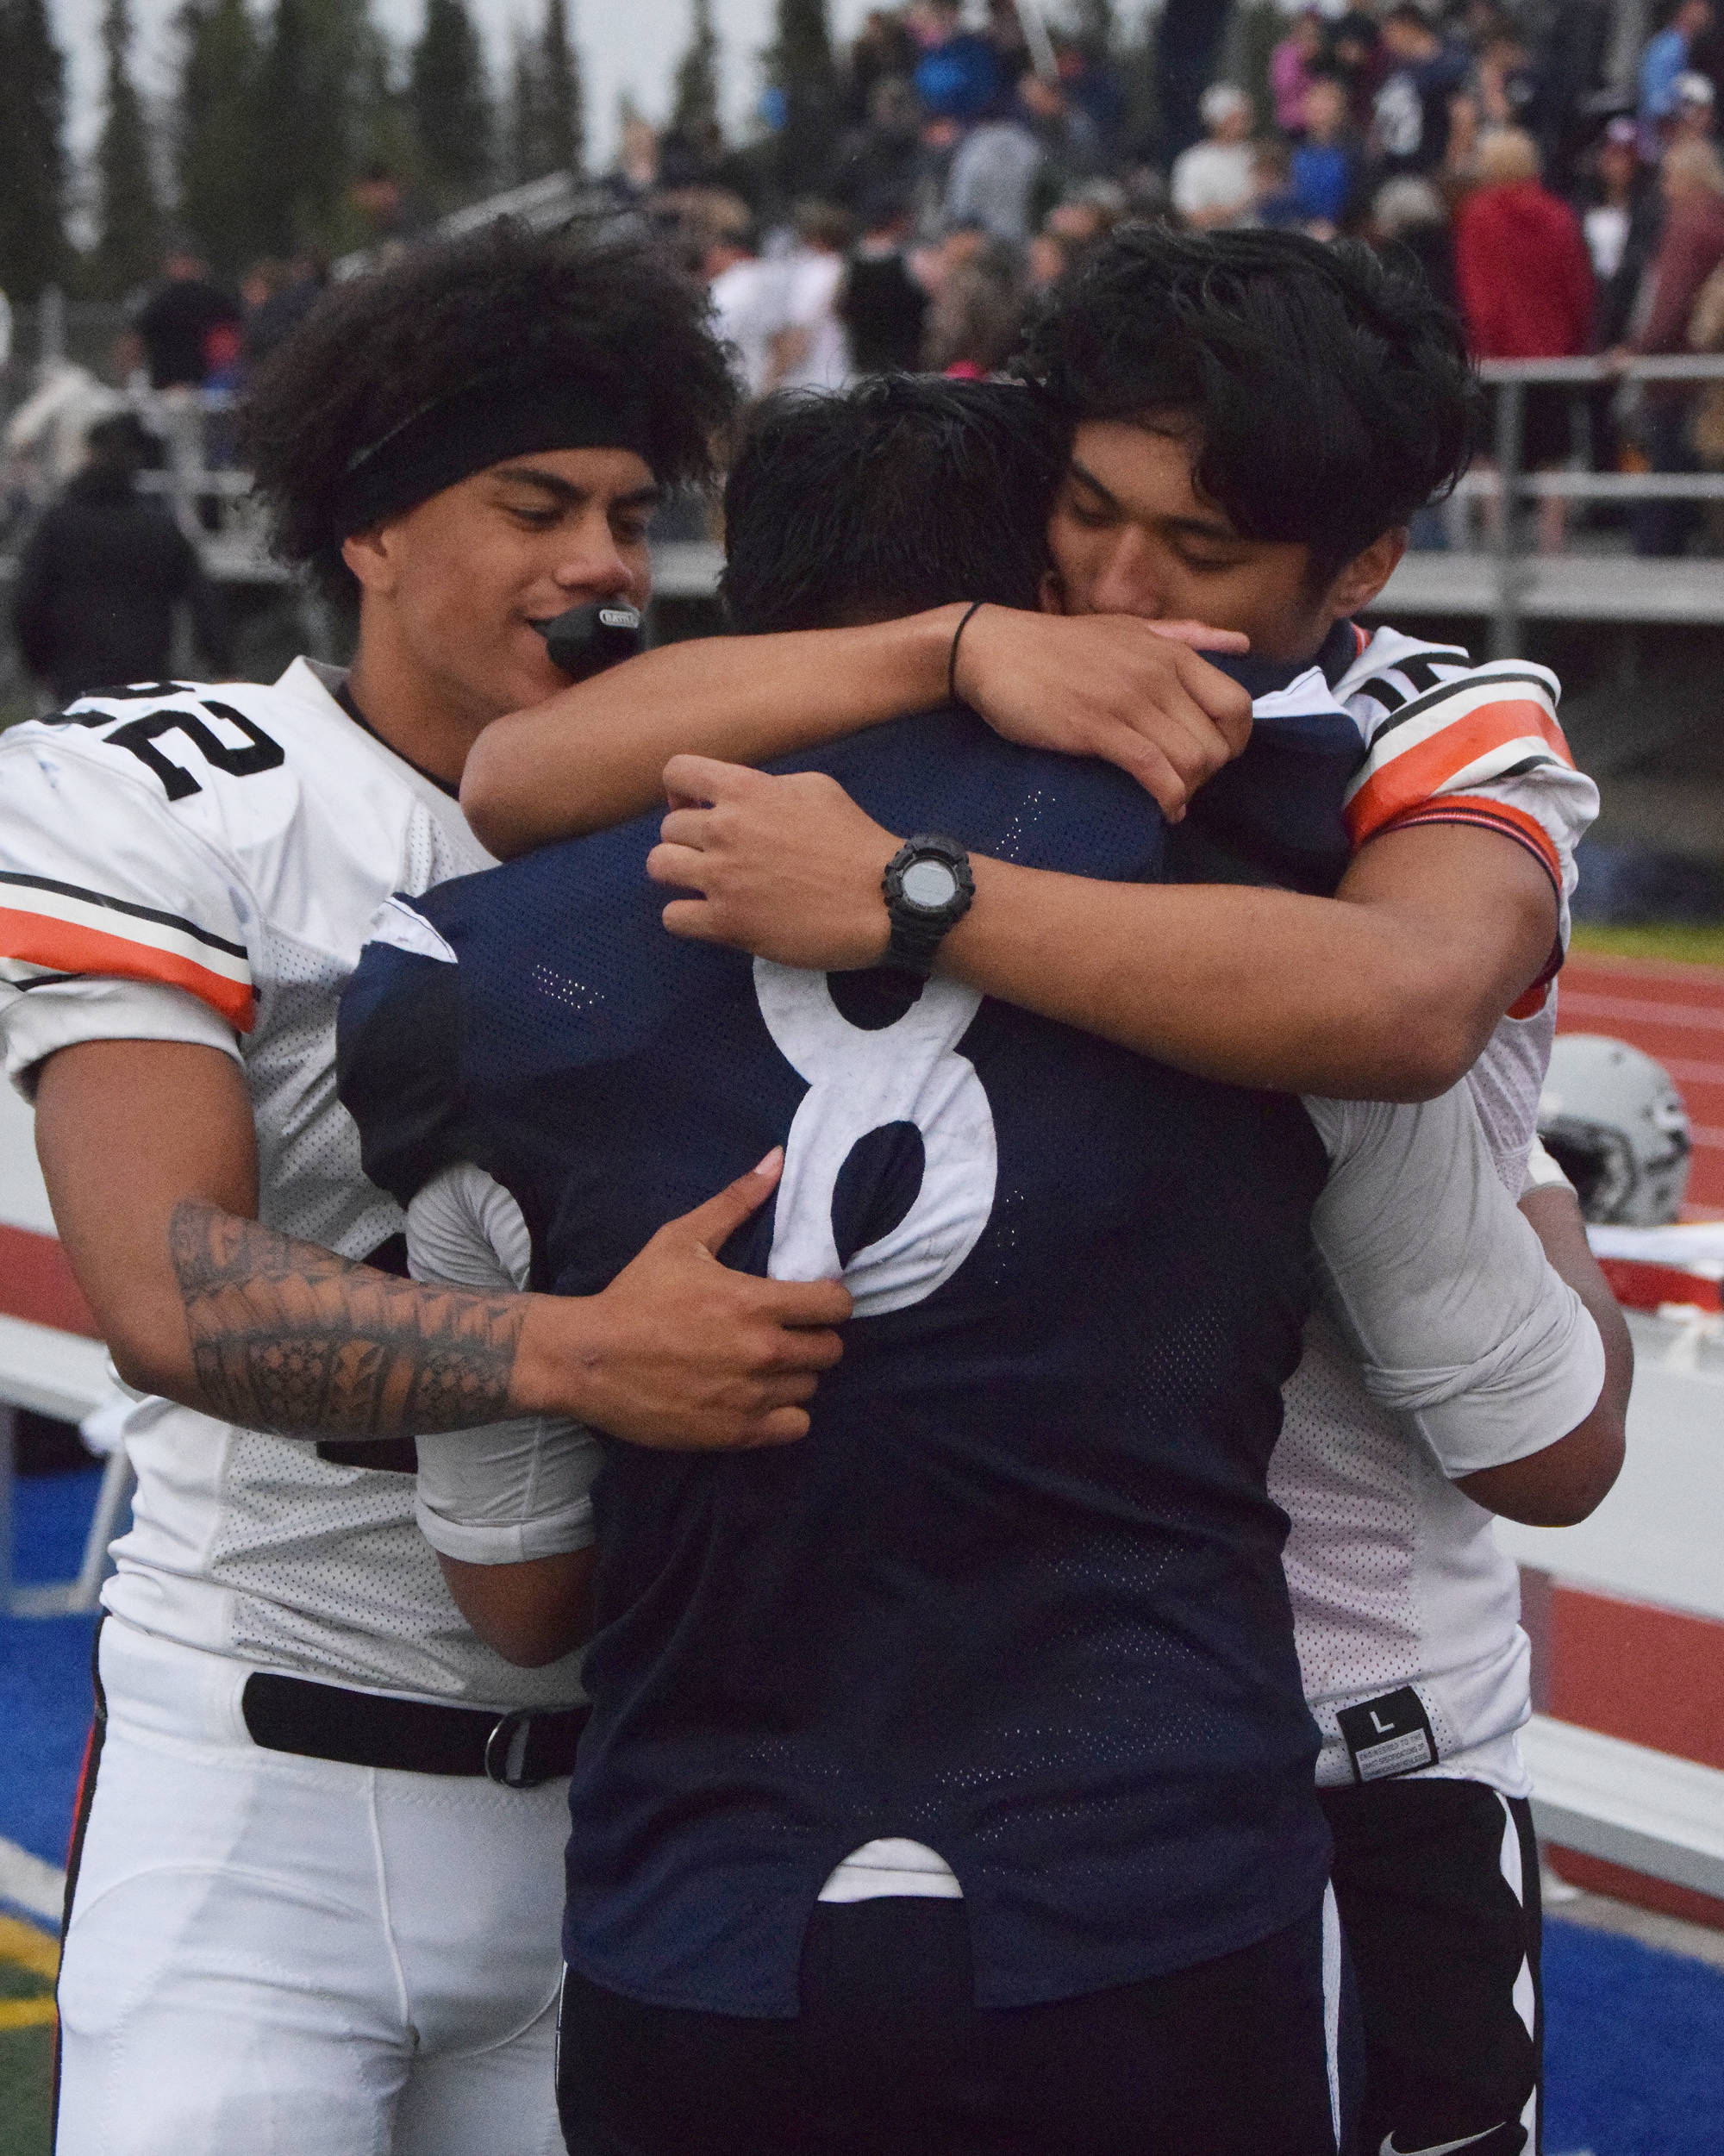 Soldotna junior Aaron Faletoi (8) is comforted by West player Zach Tiu following SoHi’s loss to West, Friday at Justin Maile Field in Soldotna. (Photo by Joey Klecka/Peninsula Clarion)